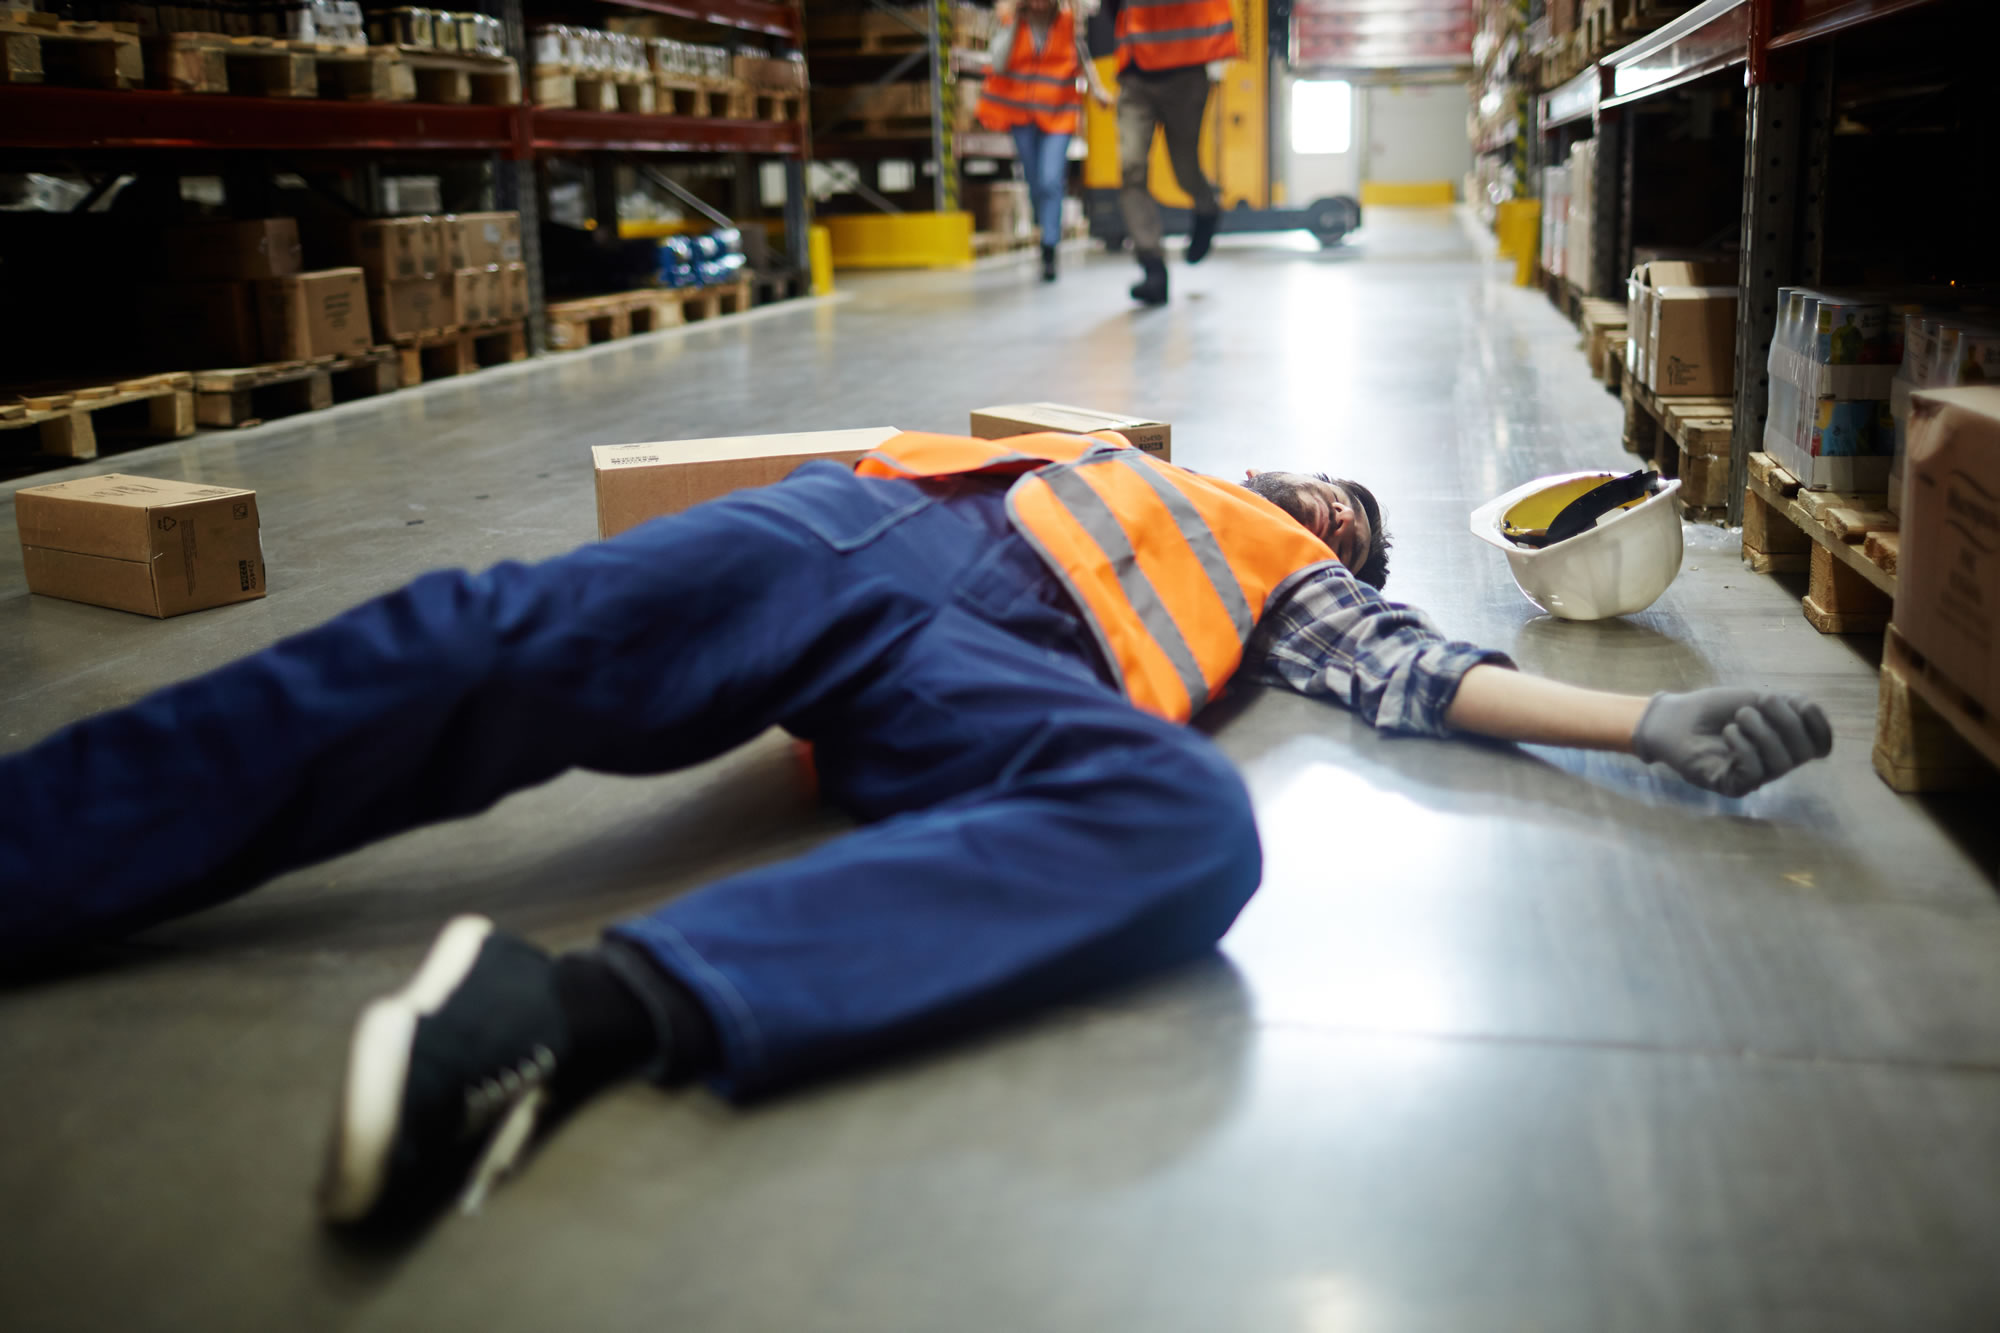 Accident at Work Claims Swindon - Slip, Trip or Fall - slip and trip hazards in the workplace, suing employer for negligence